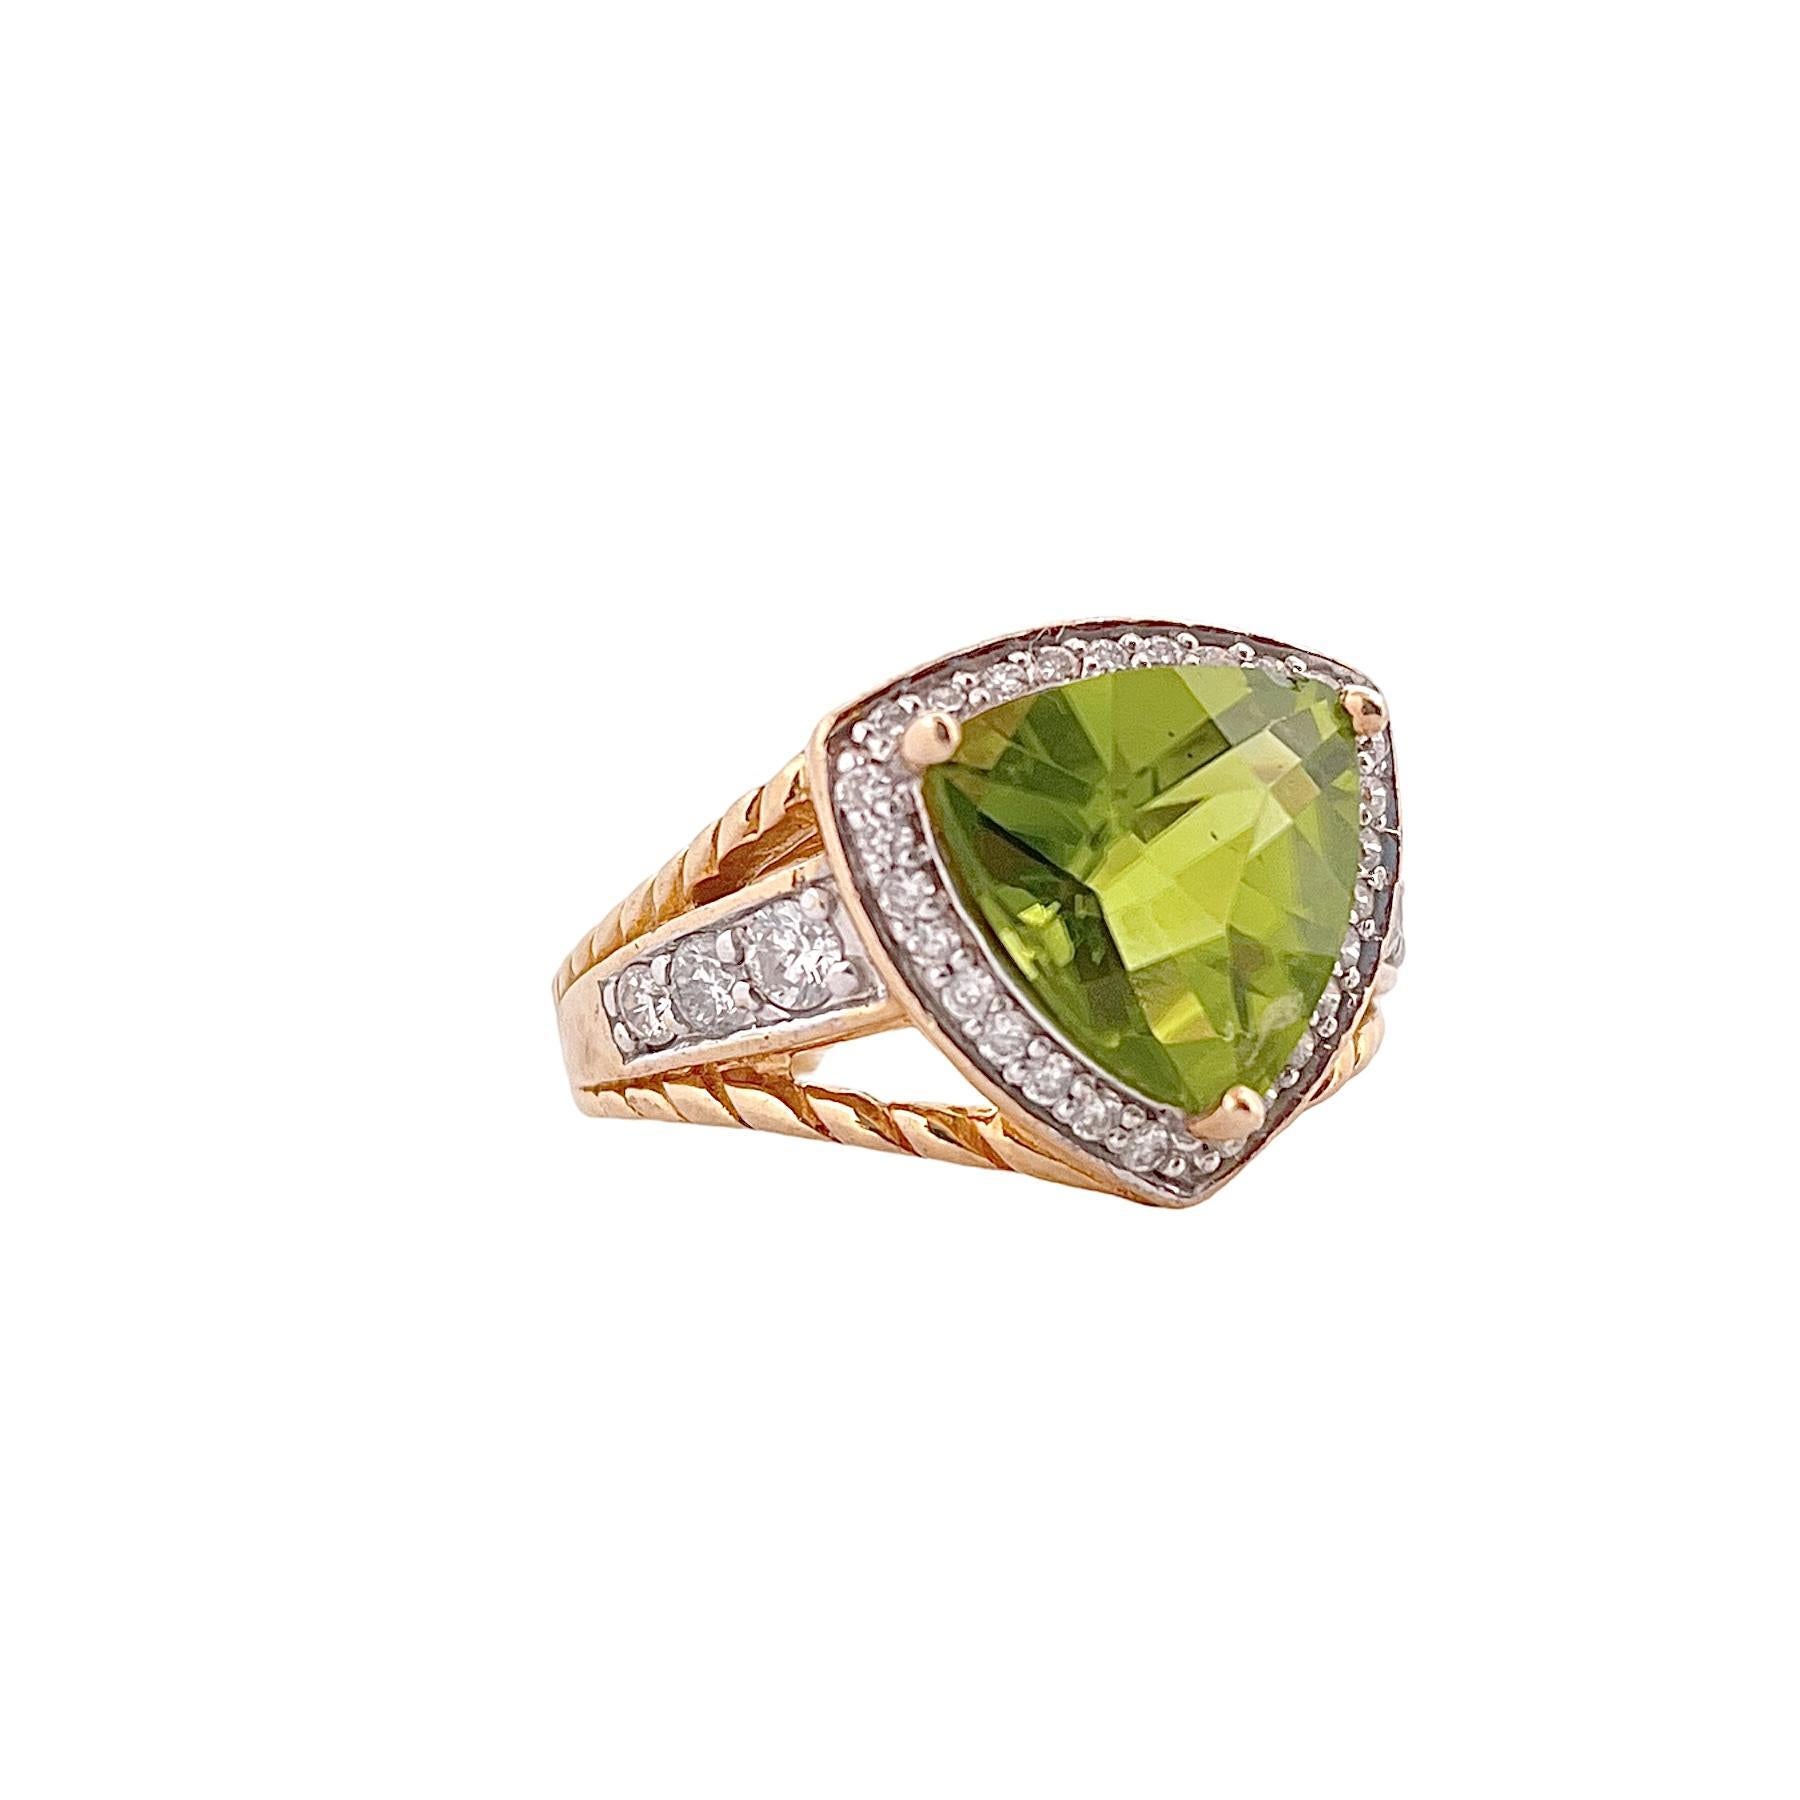 Victorian LeVian Trillion Peridot Ring with Diamond Accents - 14K Yellow Gold For Sale